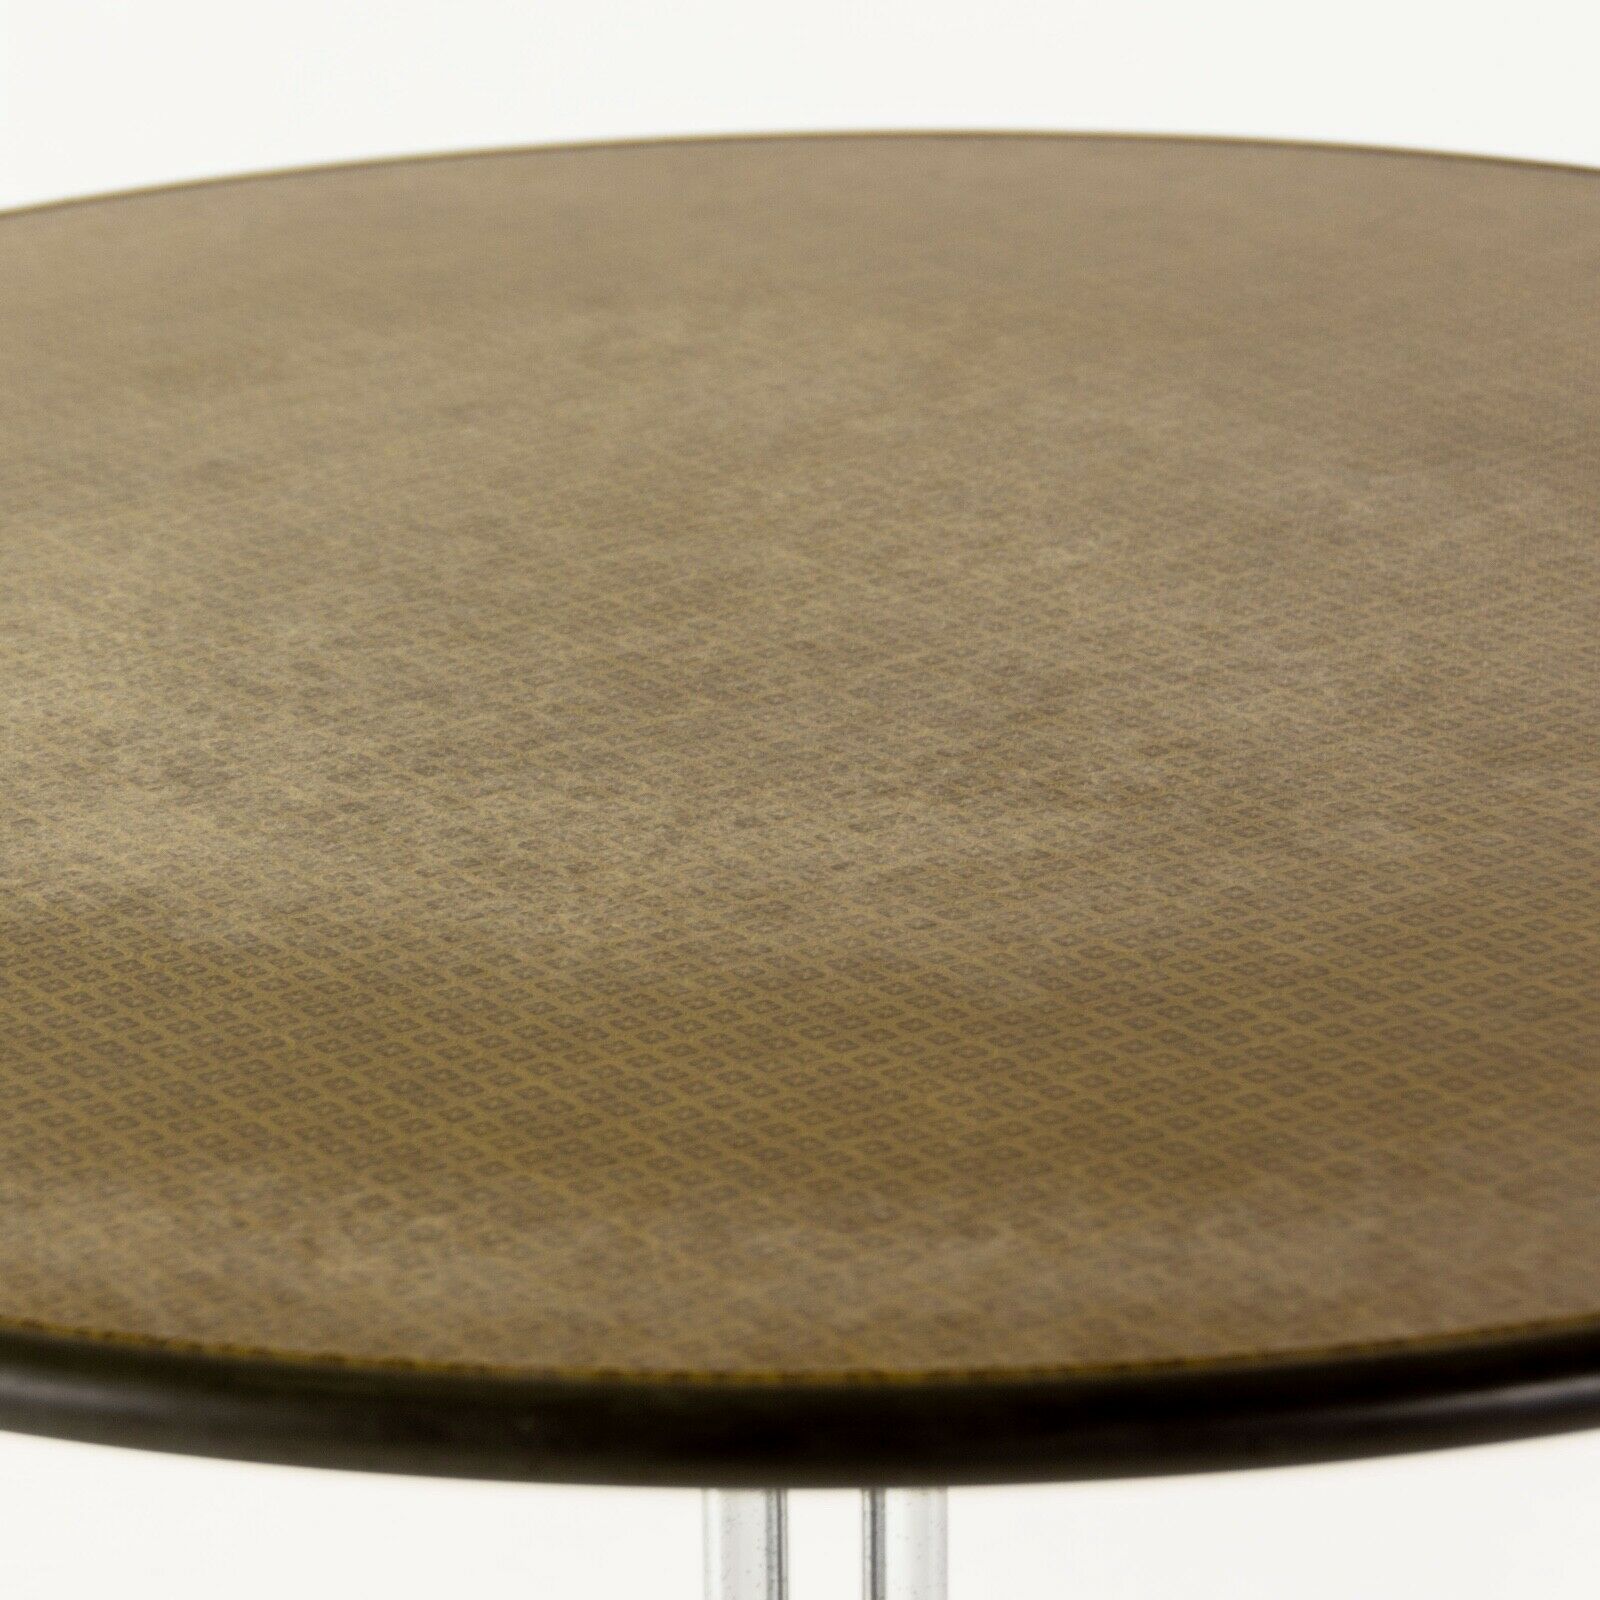 1967 Prototype Alexander Girard / Ray Eames / Charles Eames Coffee Table by Herman Miller